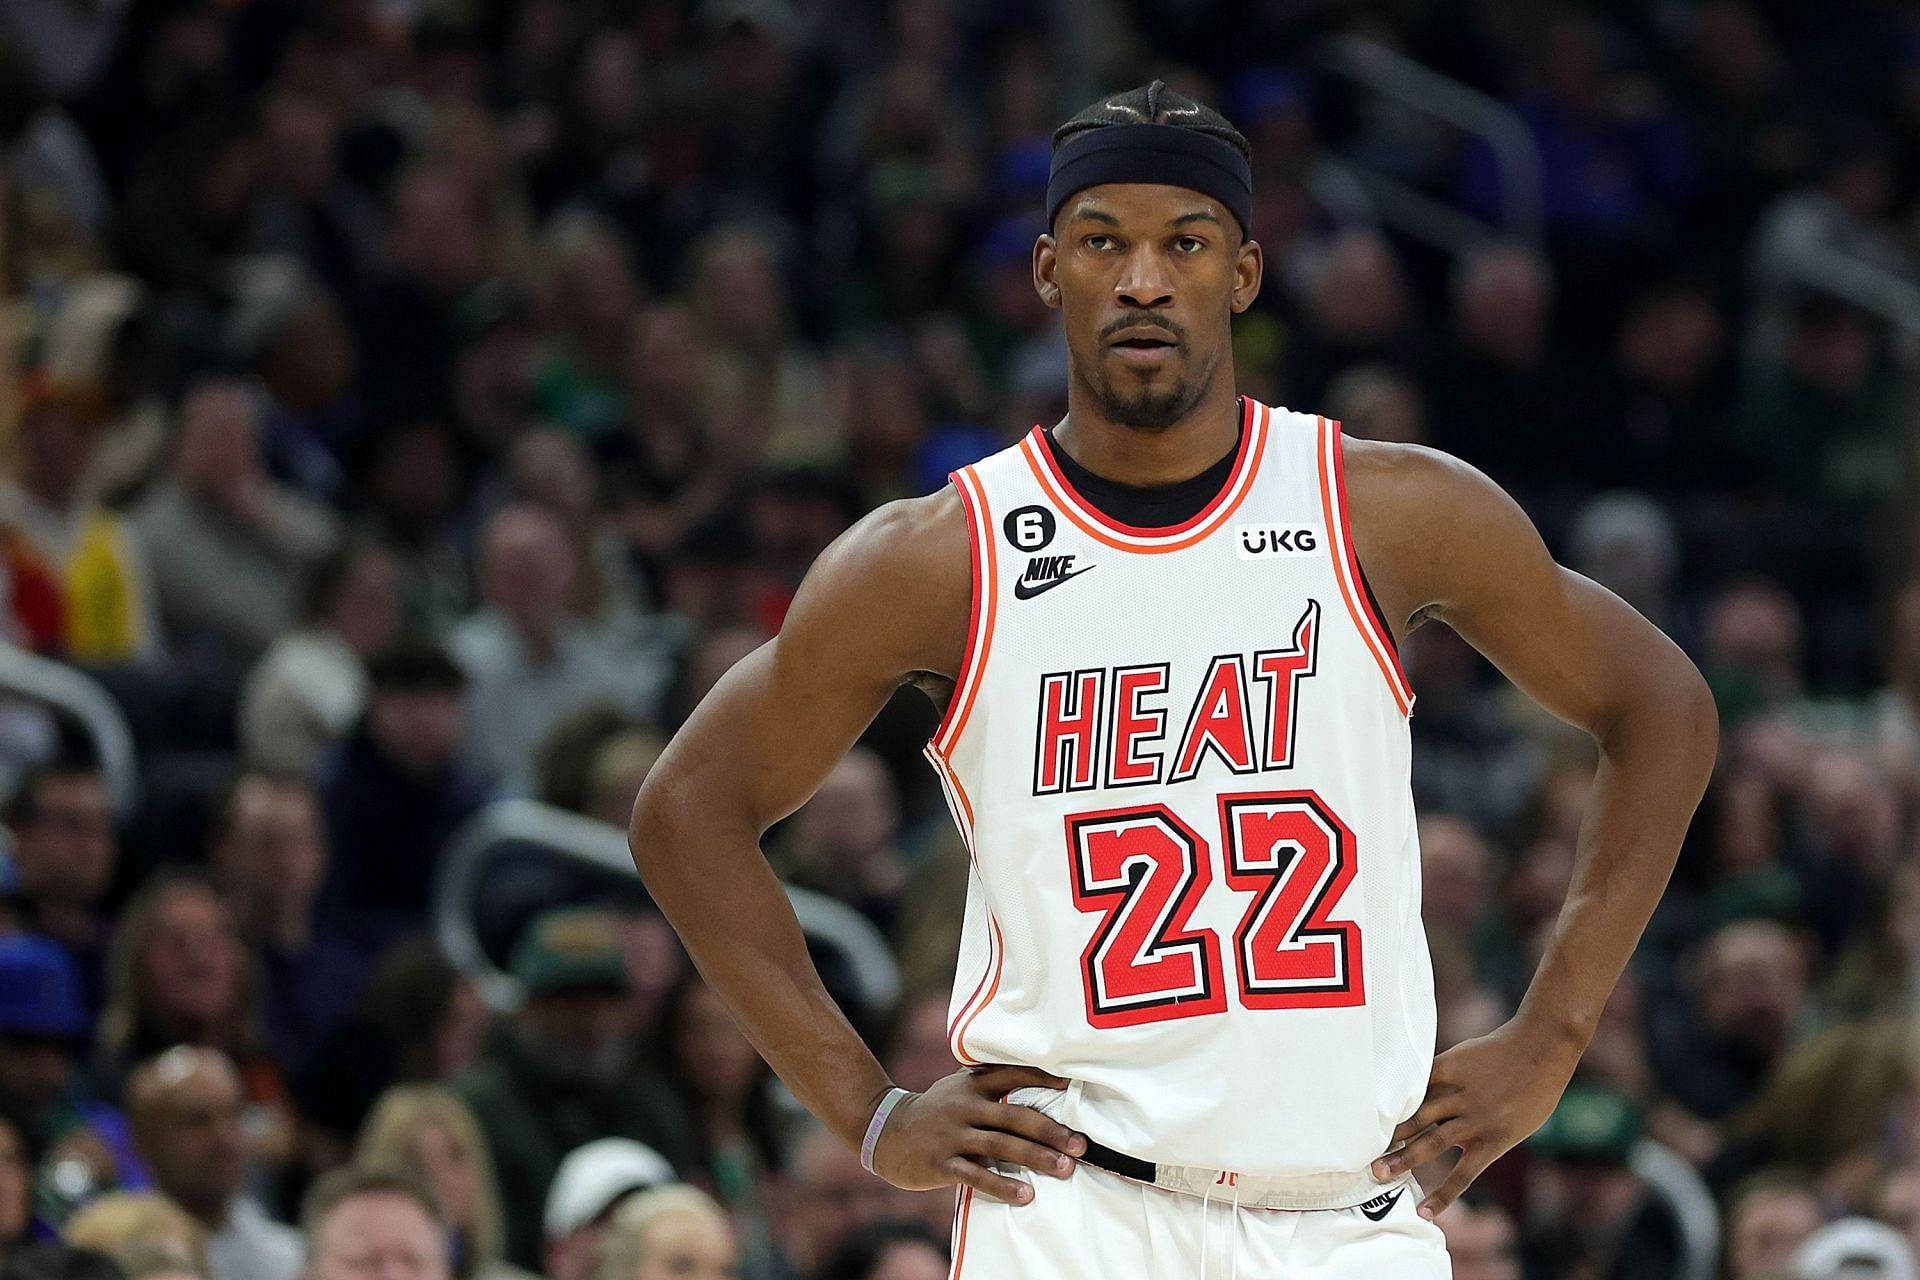 Complex Sports on X: Jimmy Butler showed up to the Heat's first practice  six hours & 30 minutes early. Practice started at 10AM, Jimmy showed up  at 3:30AM to workout. 😳 (Per @